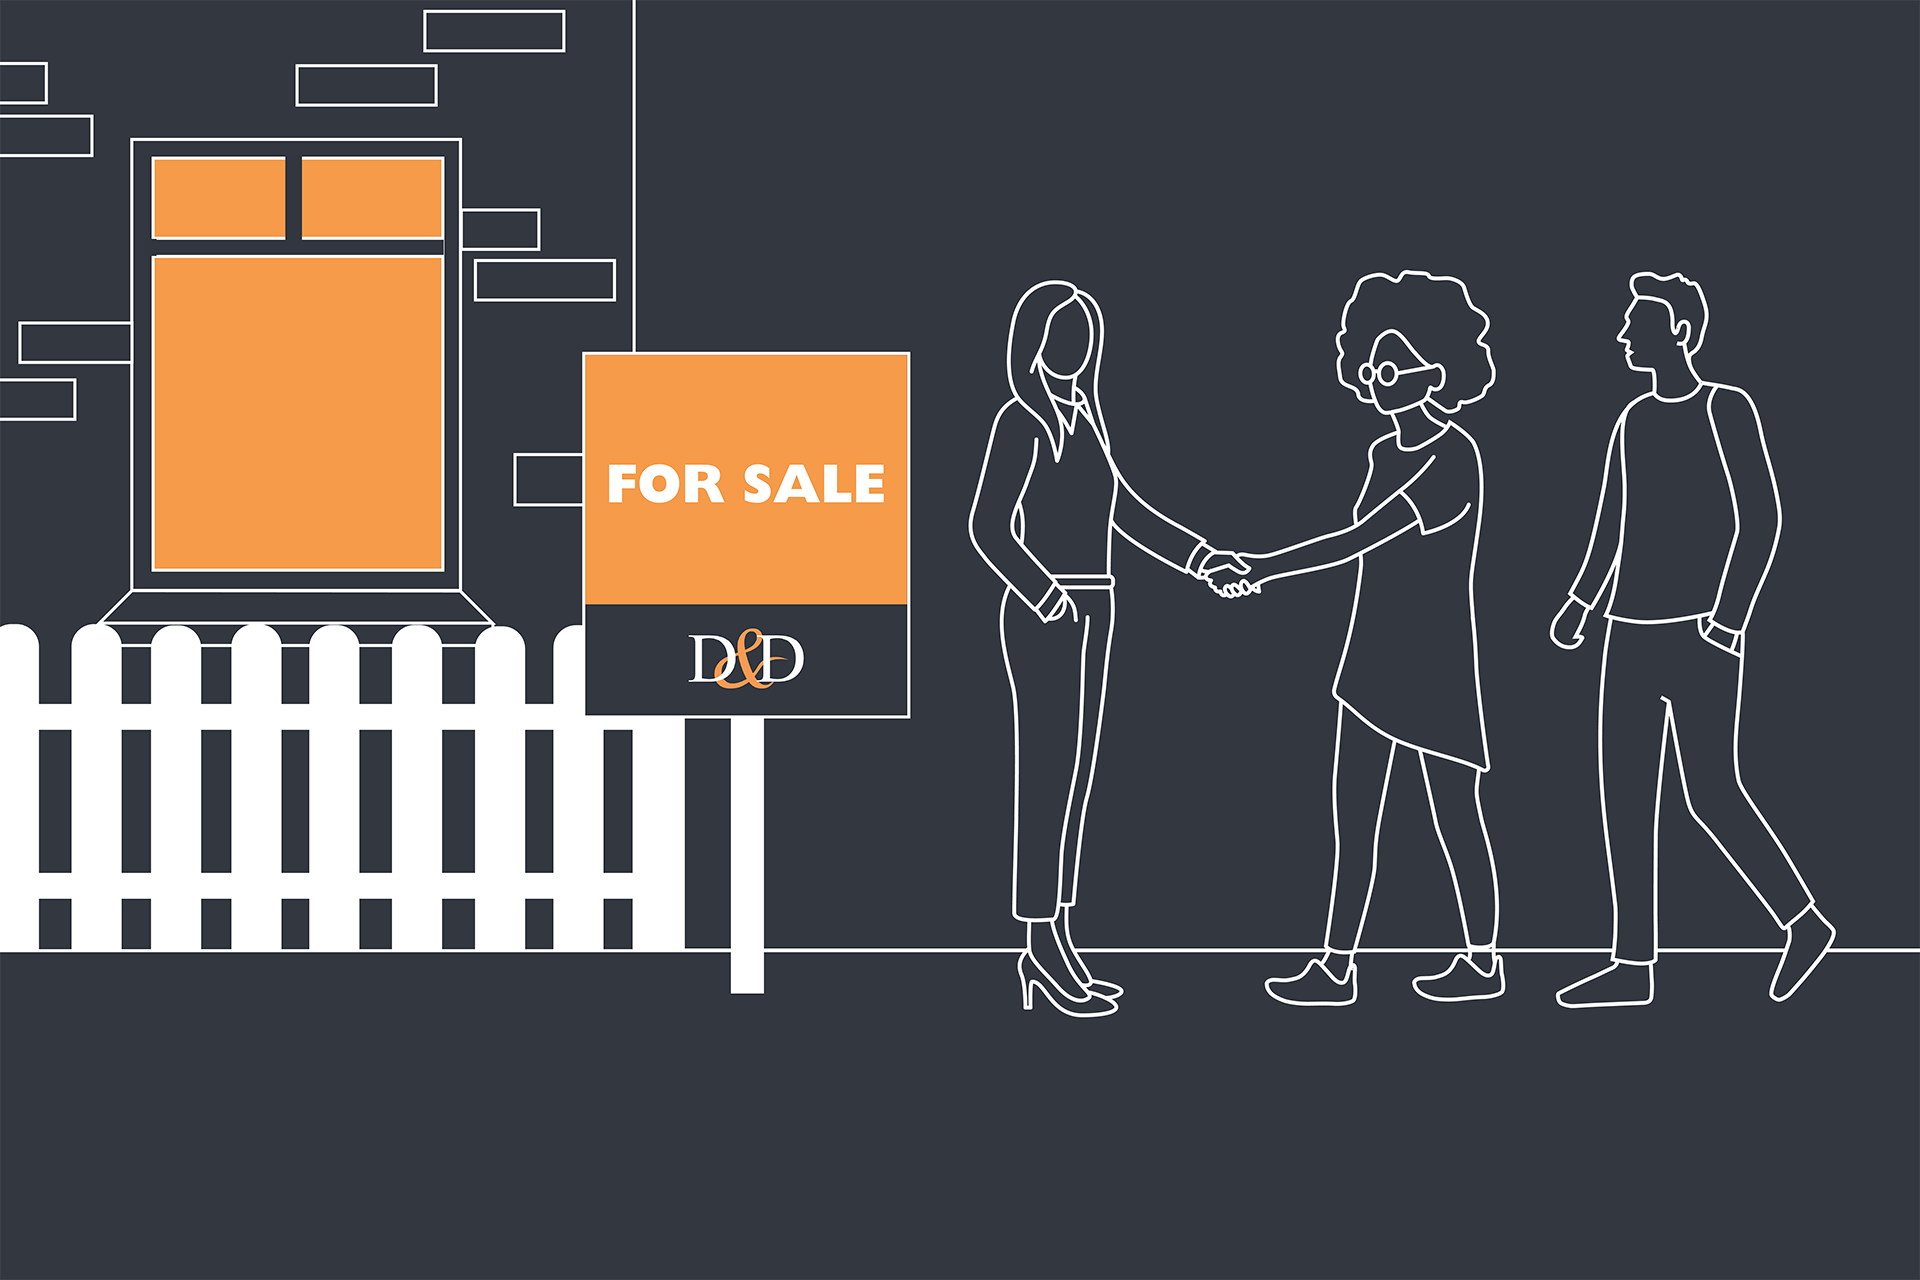 A D&D Styled Illustration of a Couple Buying a House Sold by Davies & Davies.